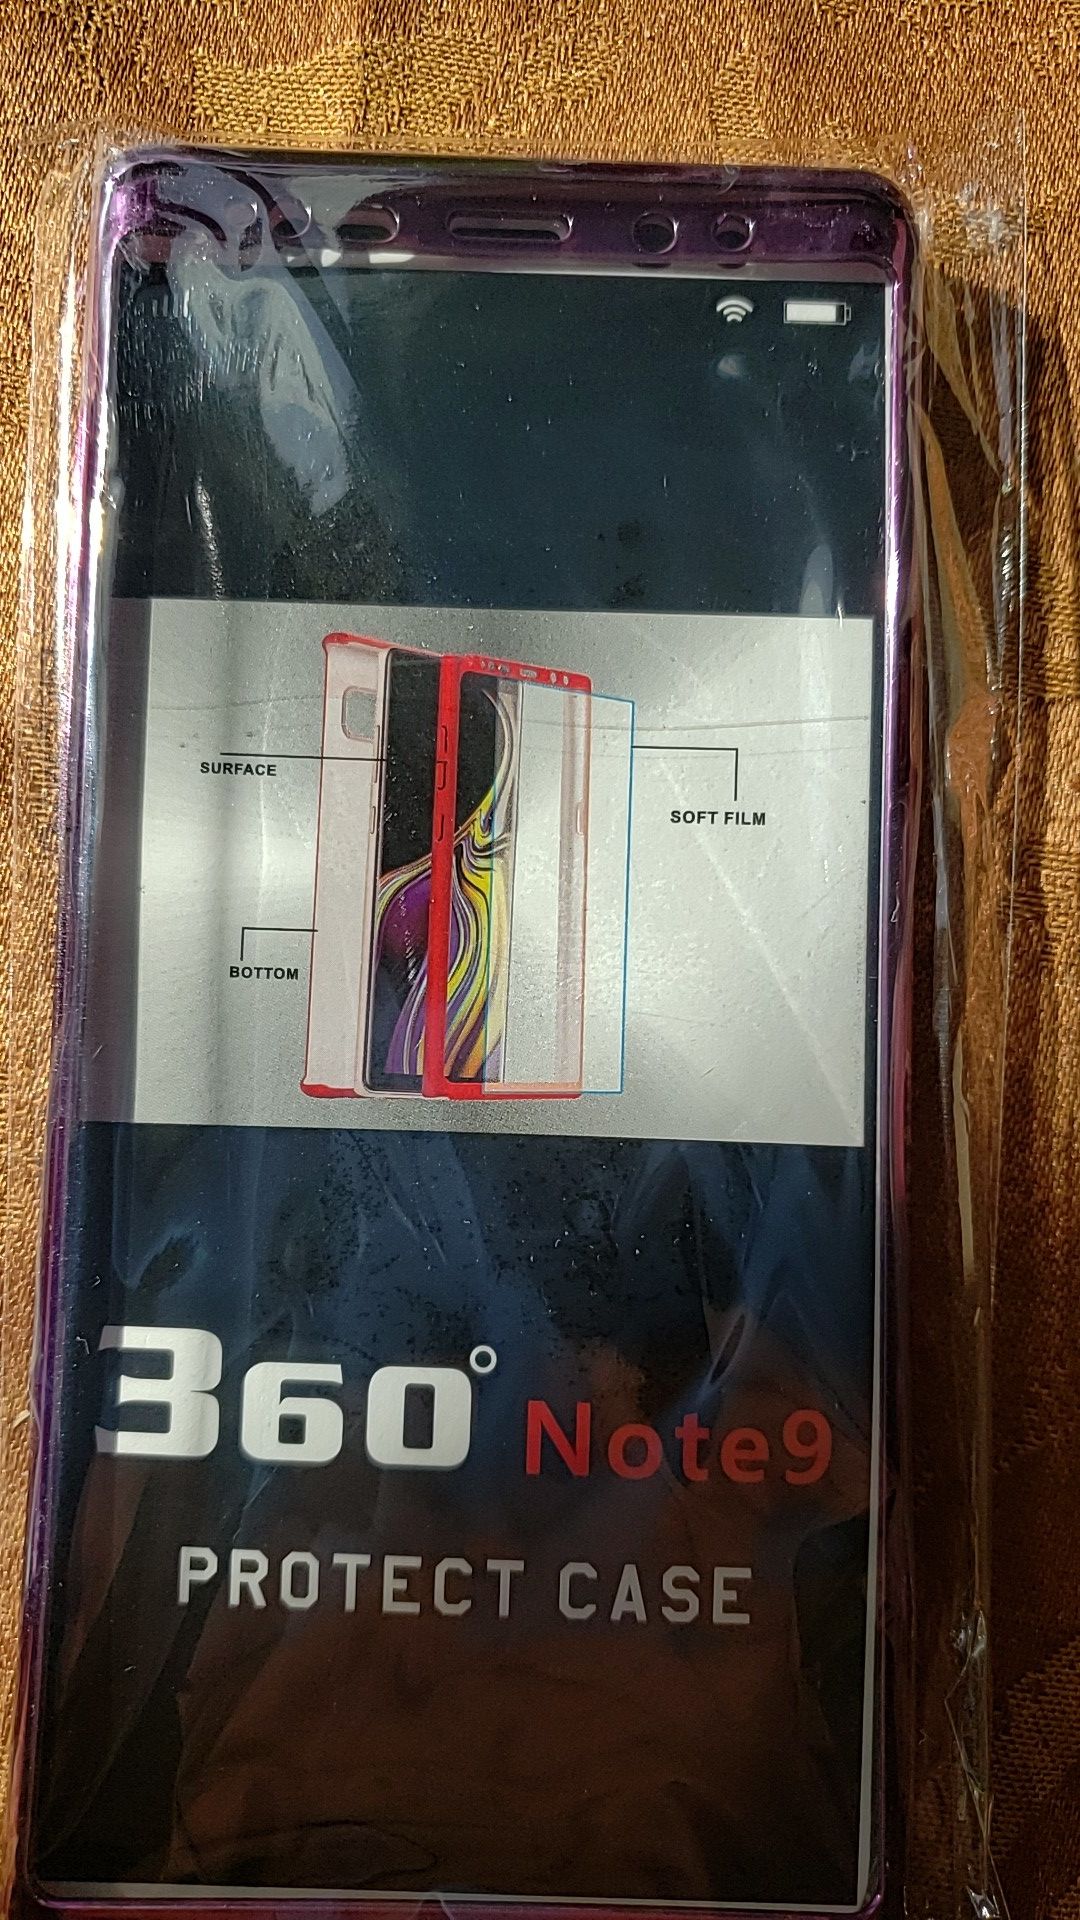 Brand new 360° Note 9 protect case